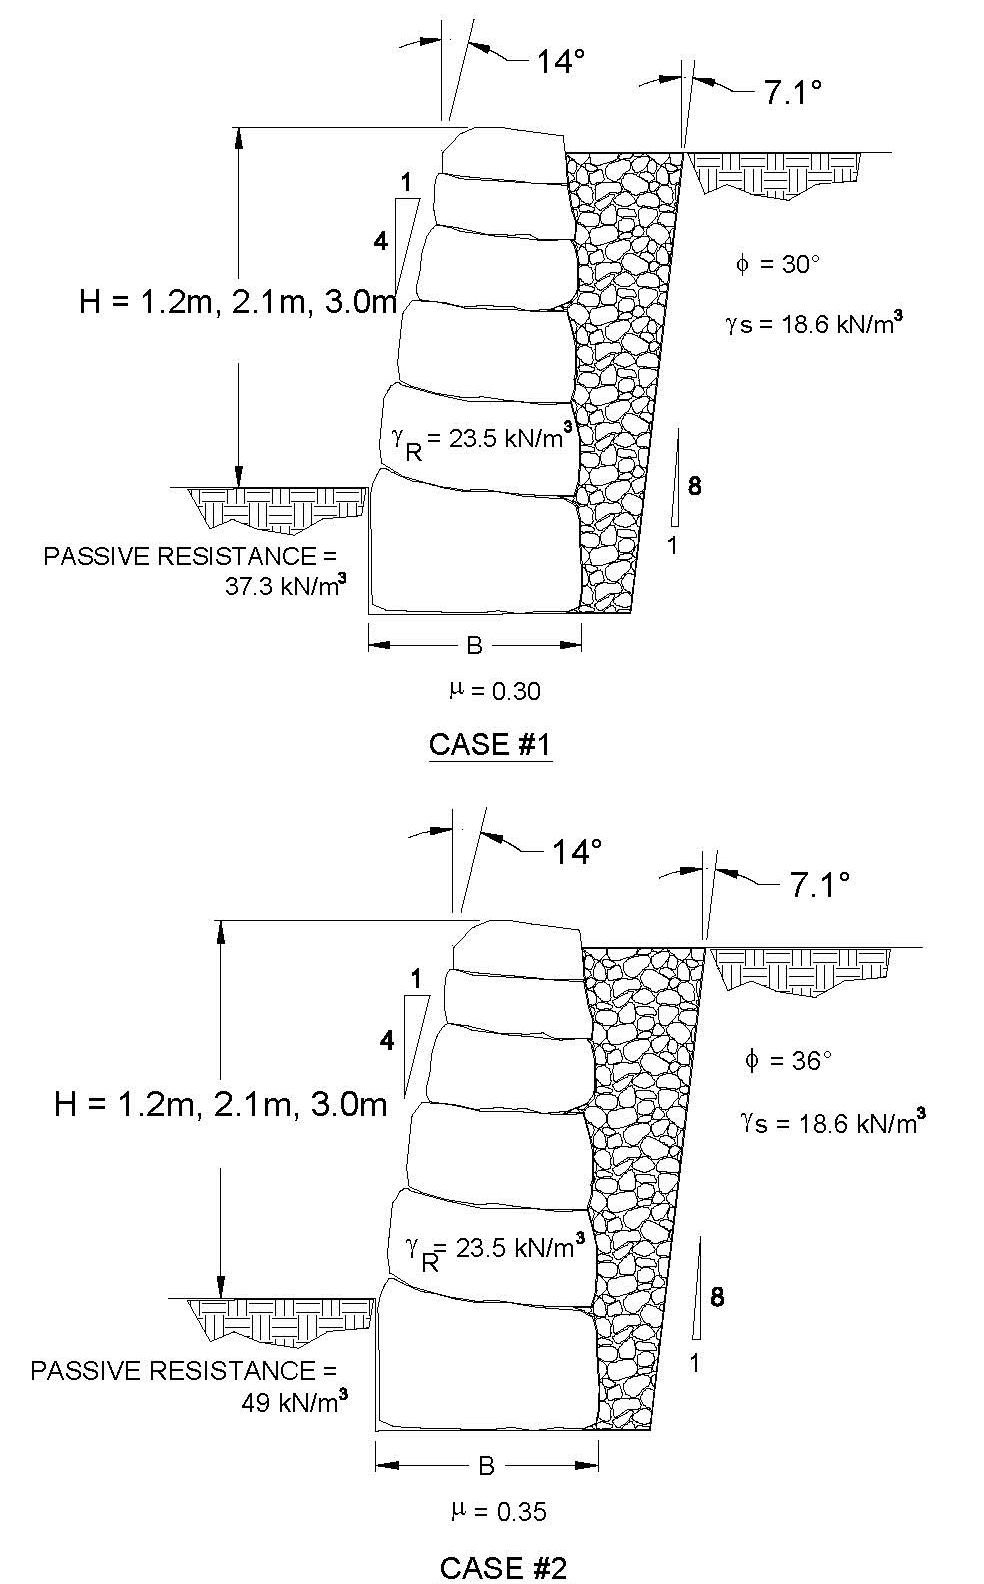 Figure 23. Graphic. Design geometry for example design Cases #1 and #2.